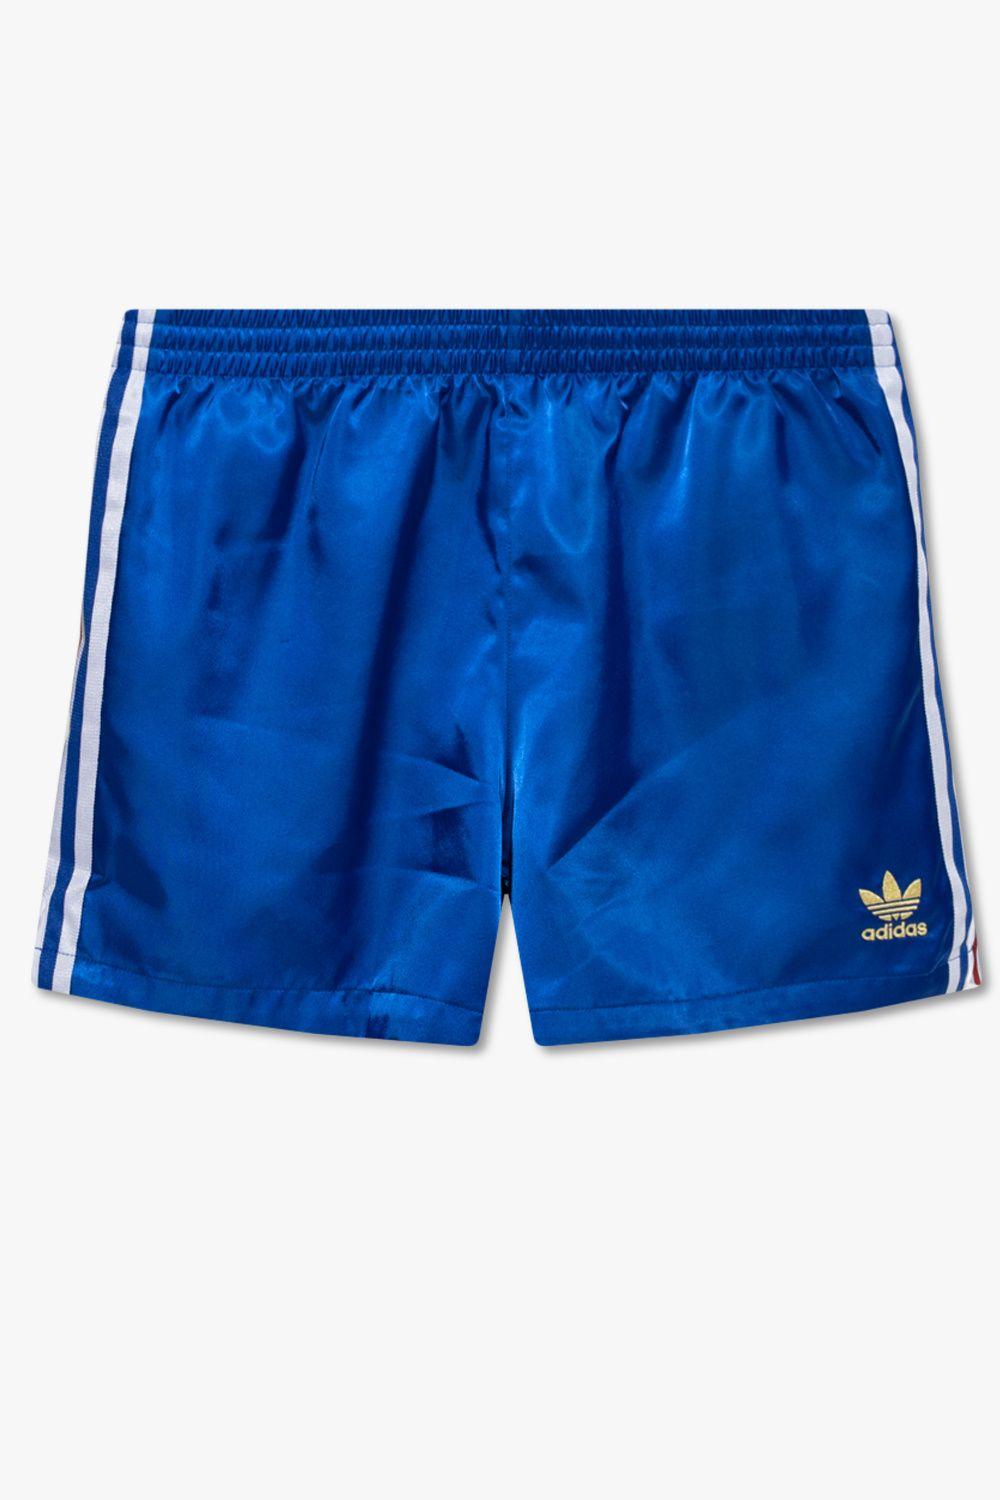 Belønning At interagere Precipice adidas Originals Shorts With Logo in Blue for Men | Lyst